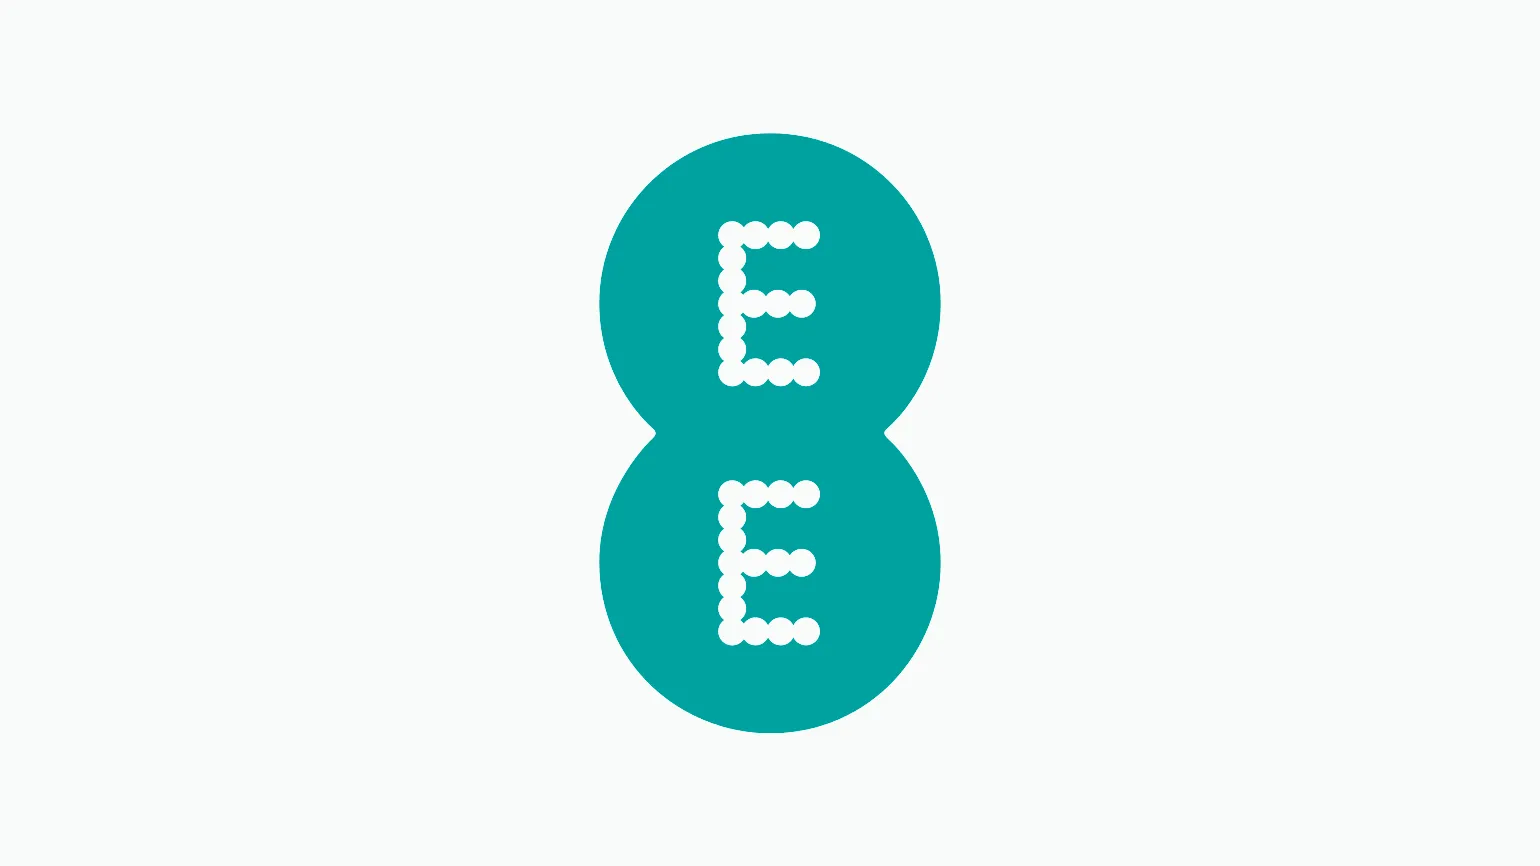 Upgrading your phone early with EE